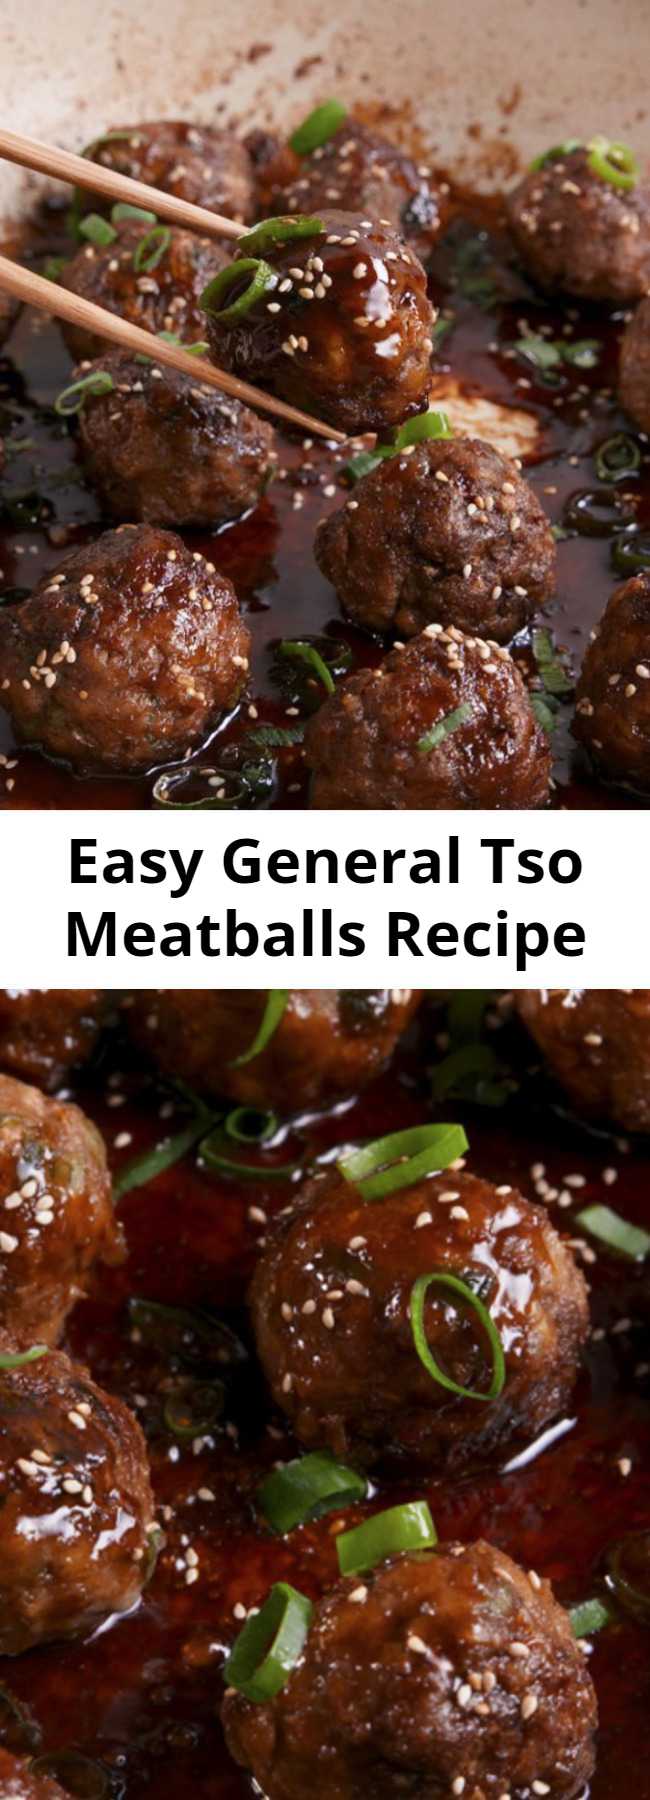 Easy General Tso Meatballs Recipe - Skip the takeout and create your own version as a meatball. #recipe #easyrecipe #easy #easydinner #dinner #dinnerrecipes #meatballs #beef #groundbeef #chinese #chinesefood